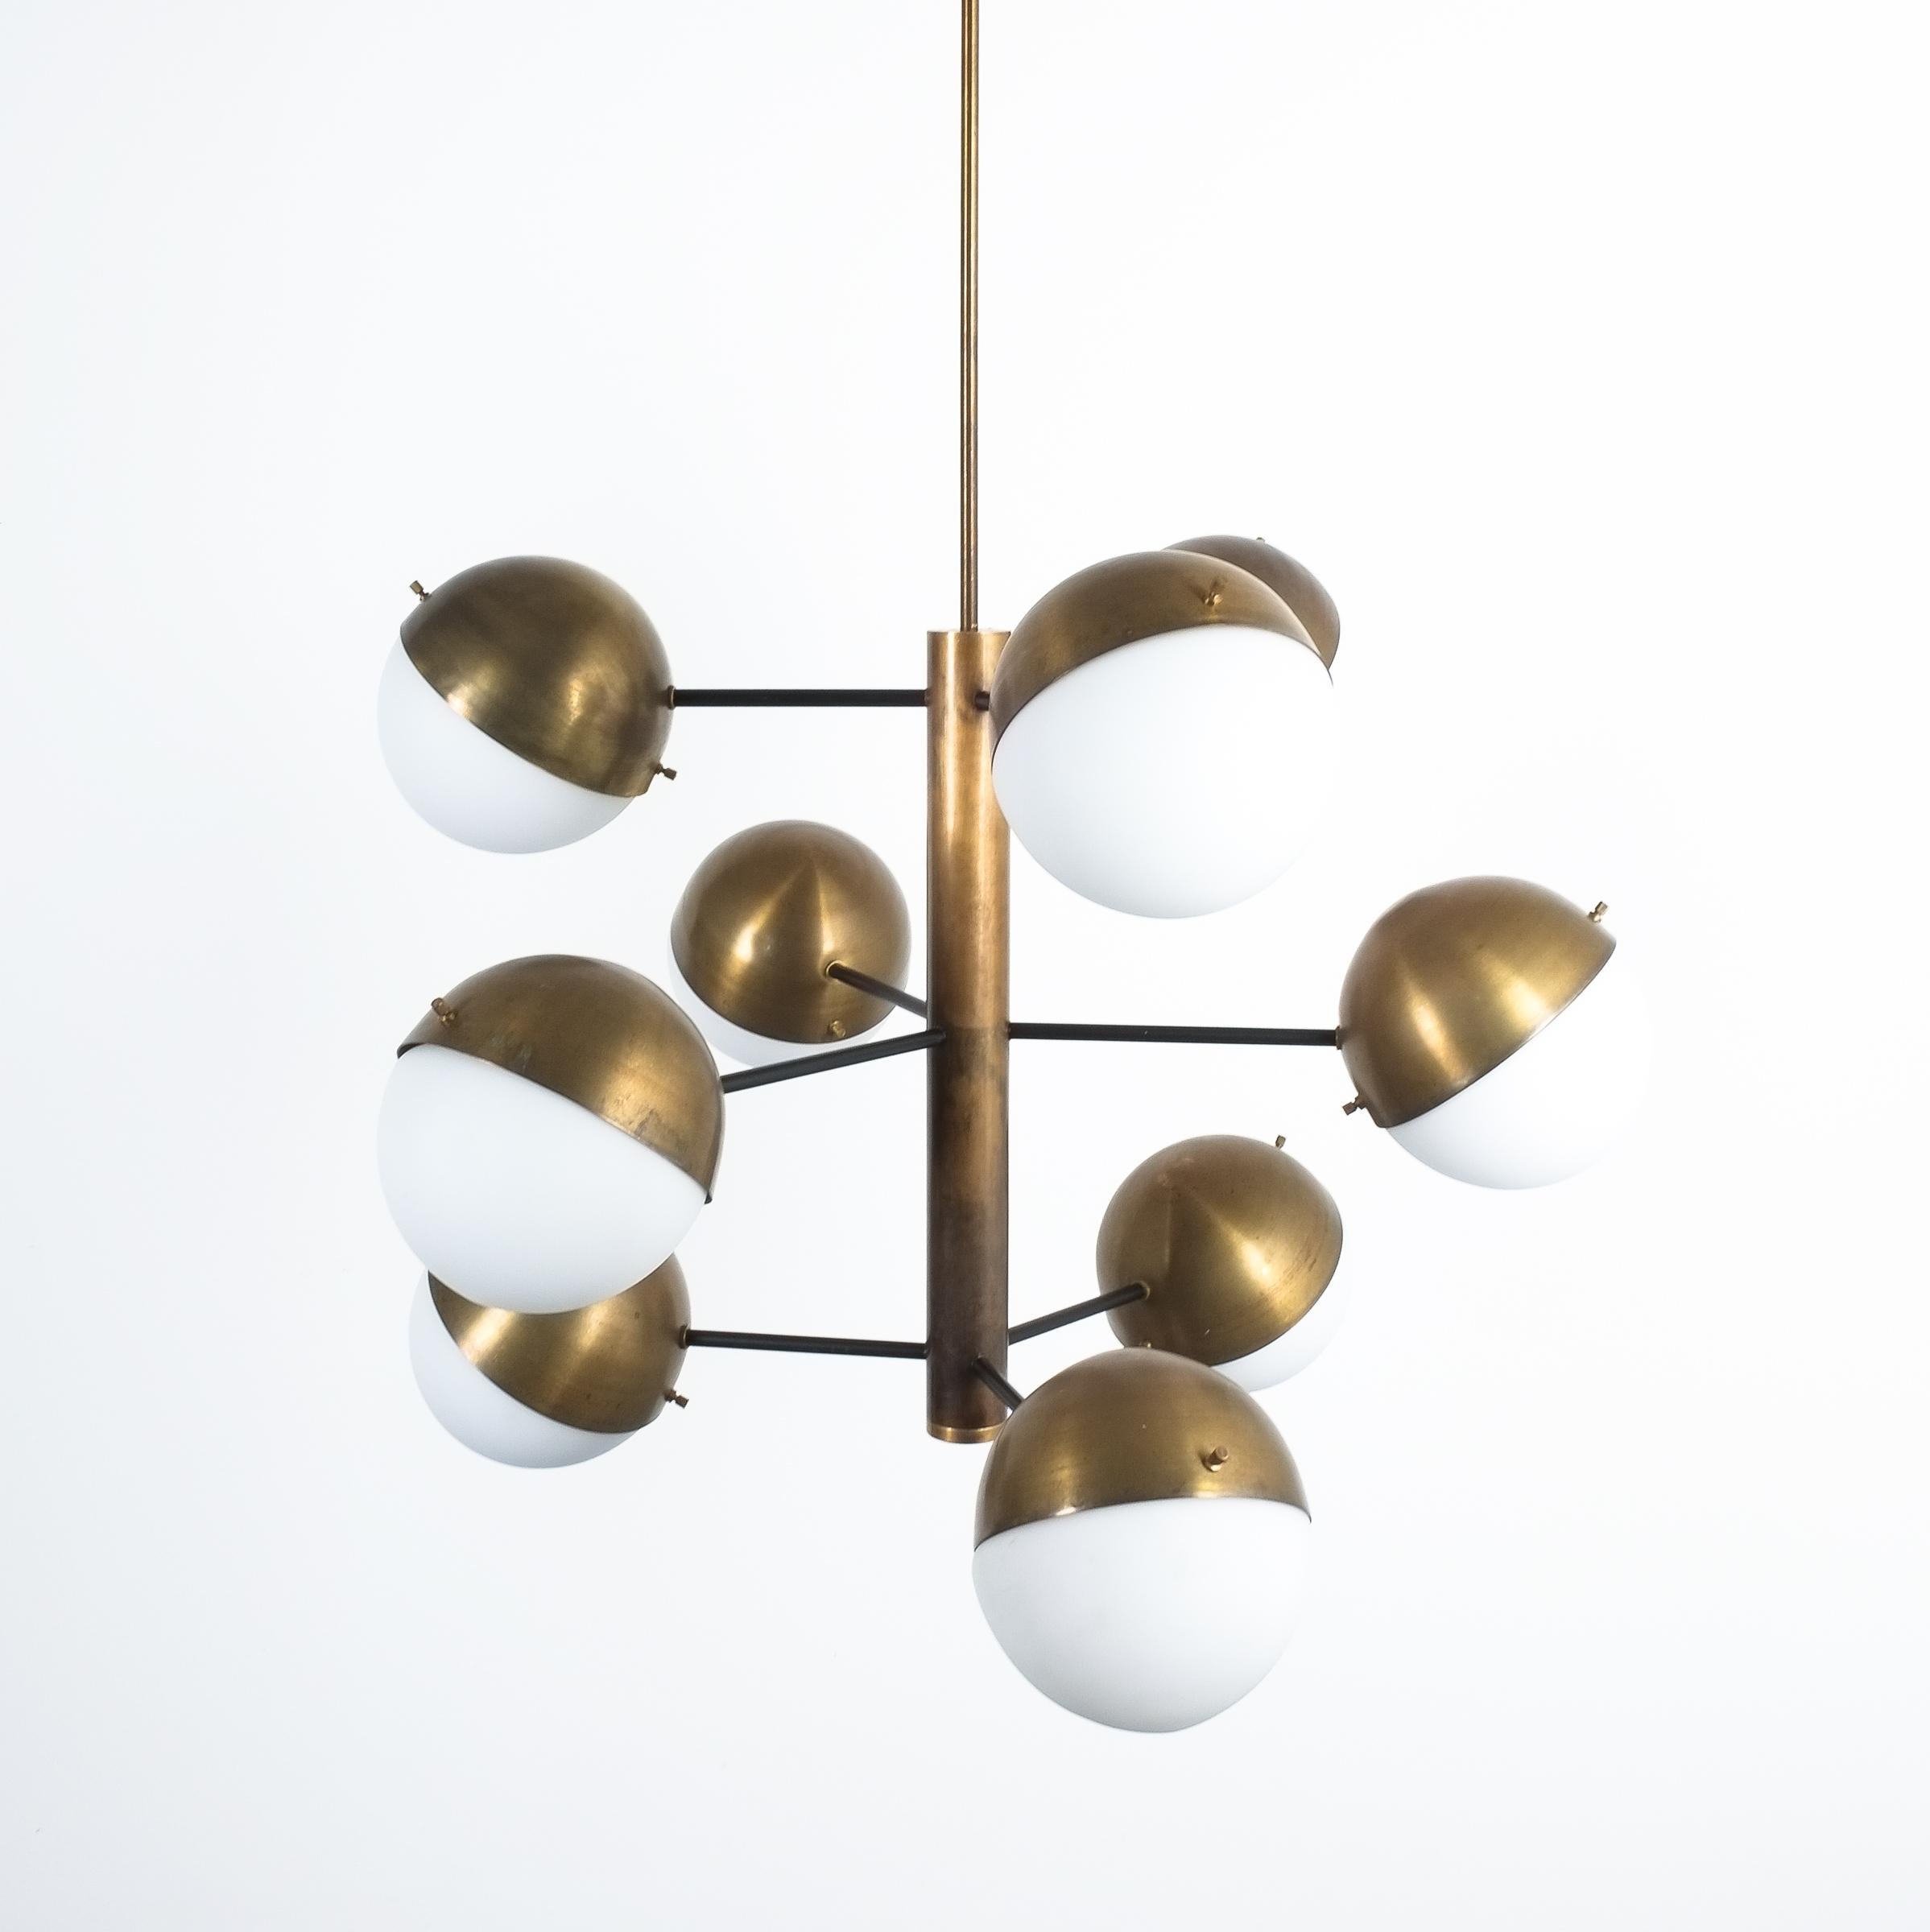 Stilnovo midcentury brass opaline glass chandelier, Italy, circa 1950. Stunning and large original Stilnovo (labelled) lamp with 9 brass and opaline glass balls, good original vintage condition with no major flaws. 9 bulbs in total are illuminating